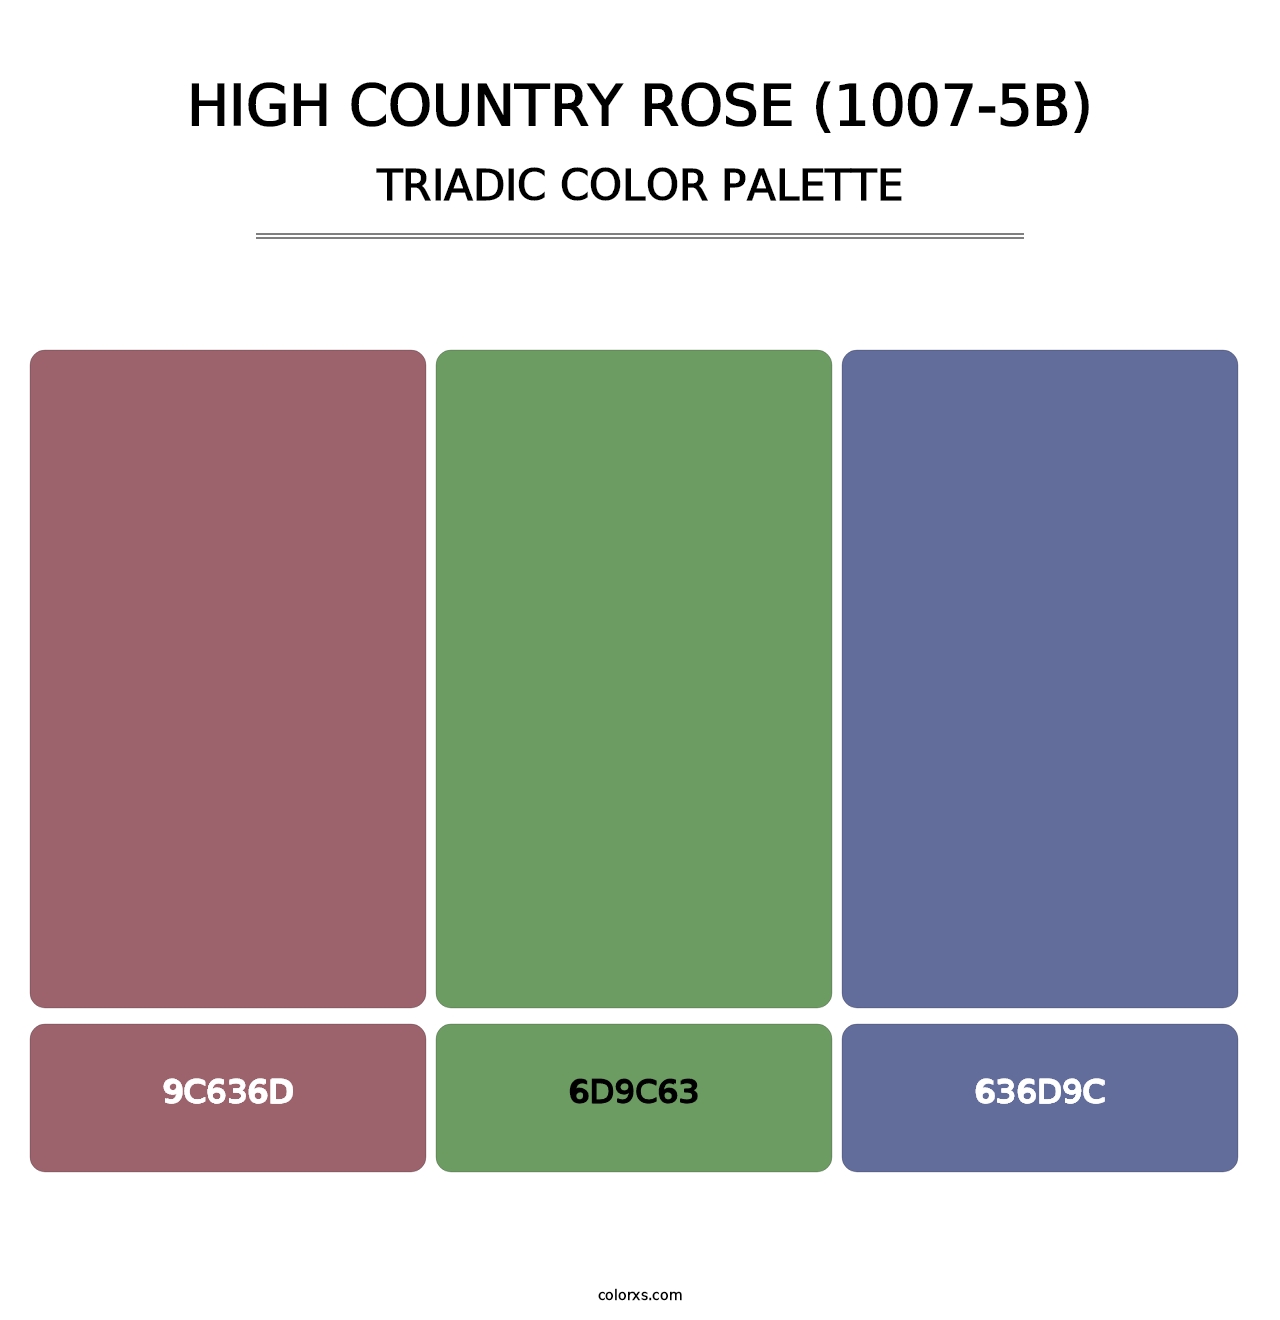 High Country Rose (1007-5B) - Triadic Color Palette